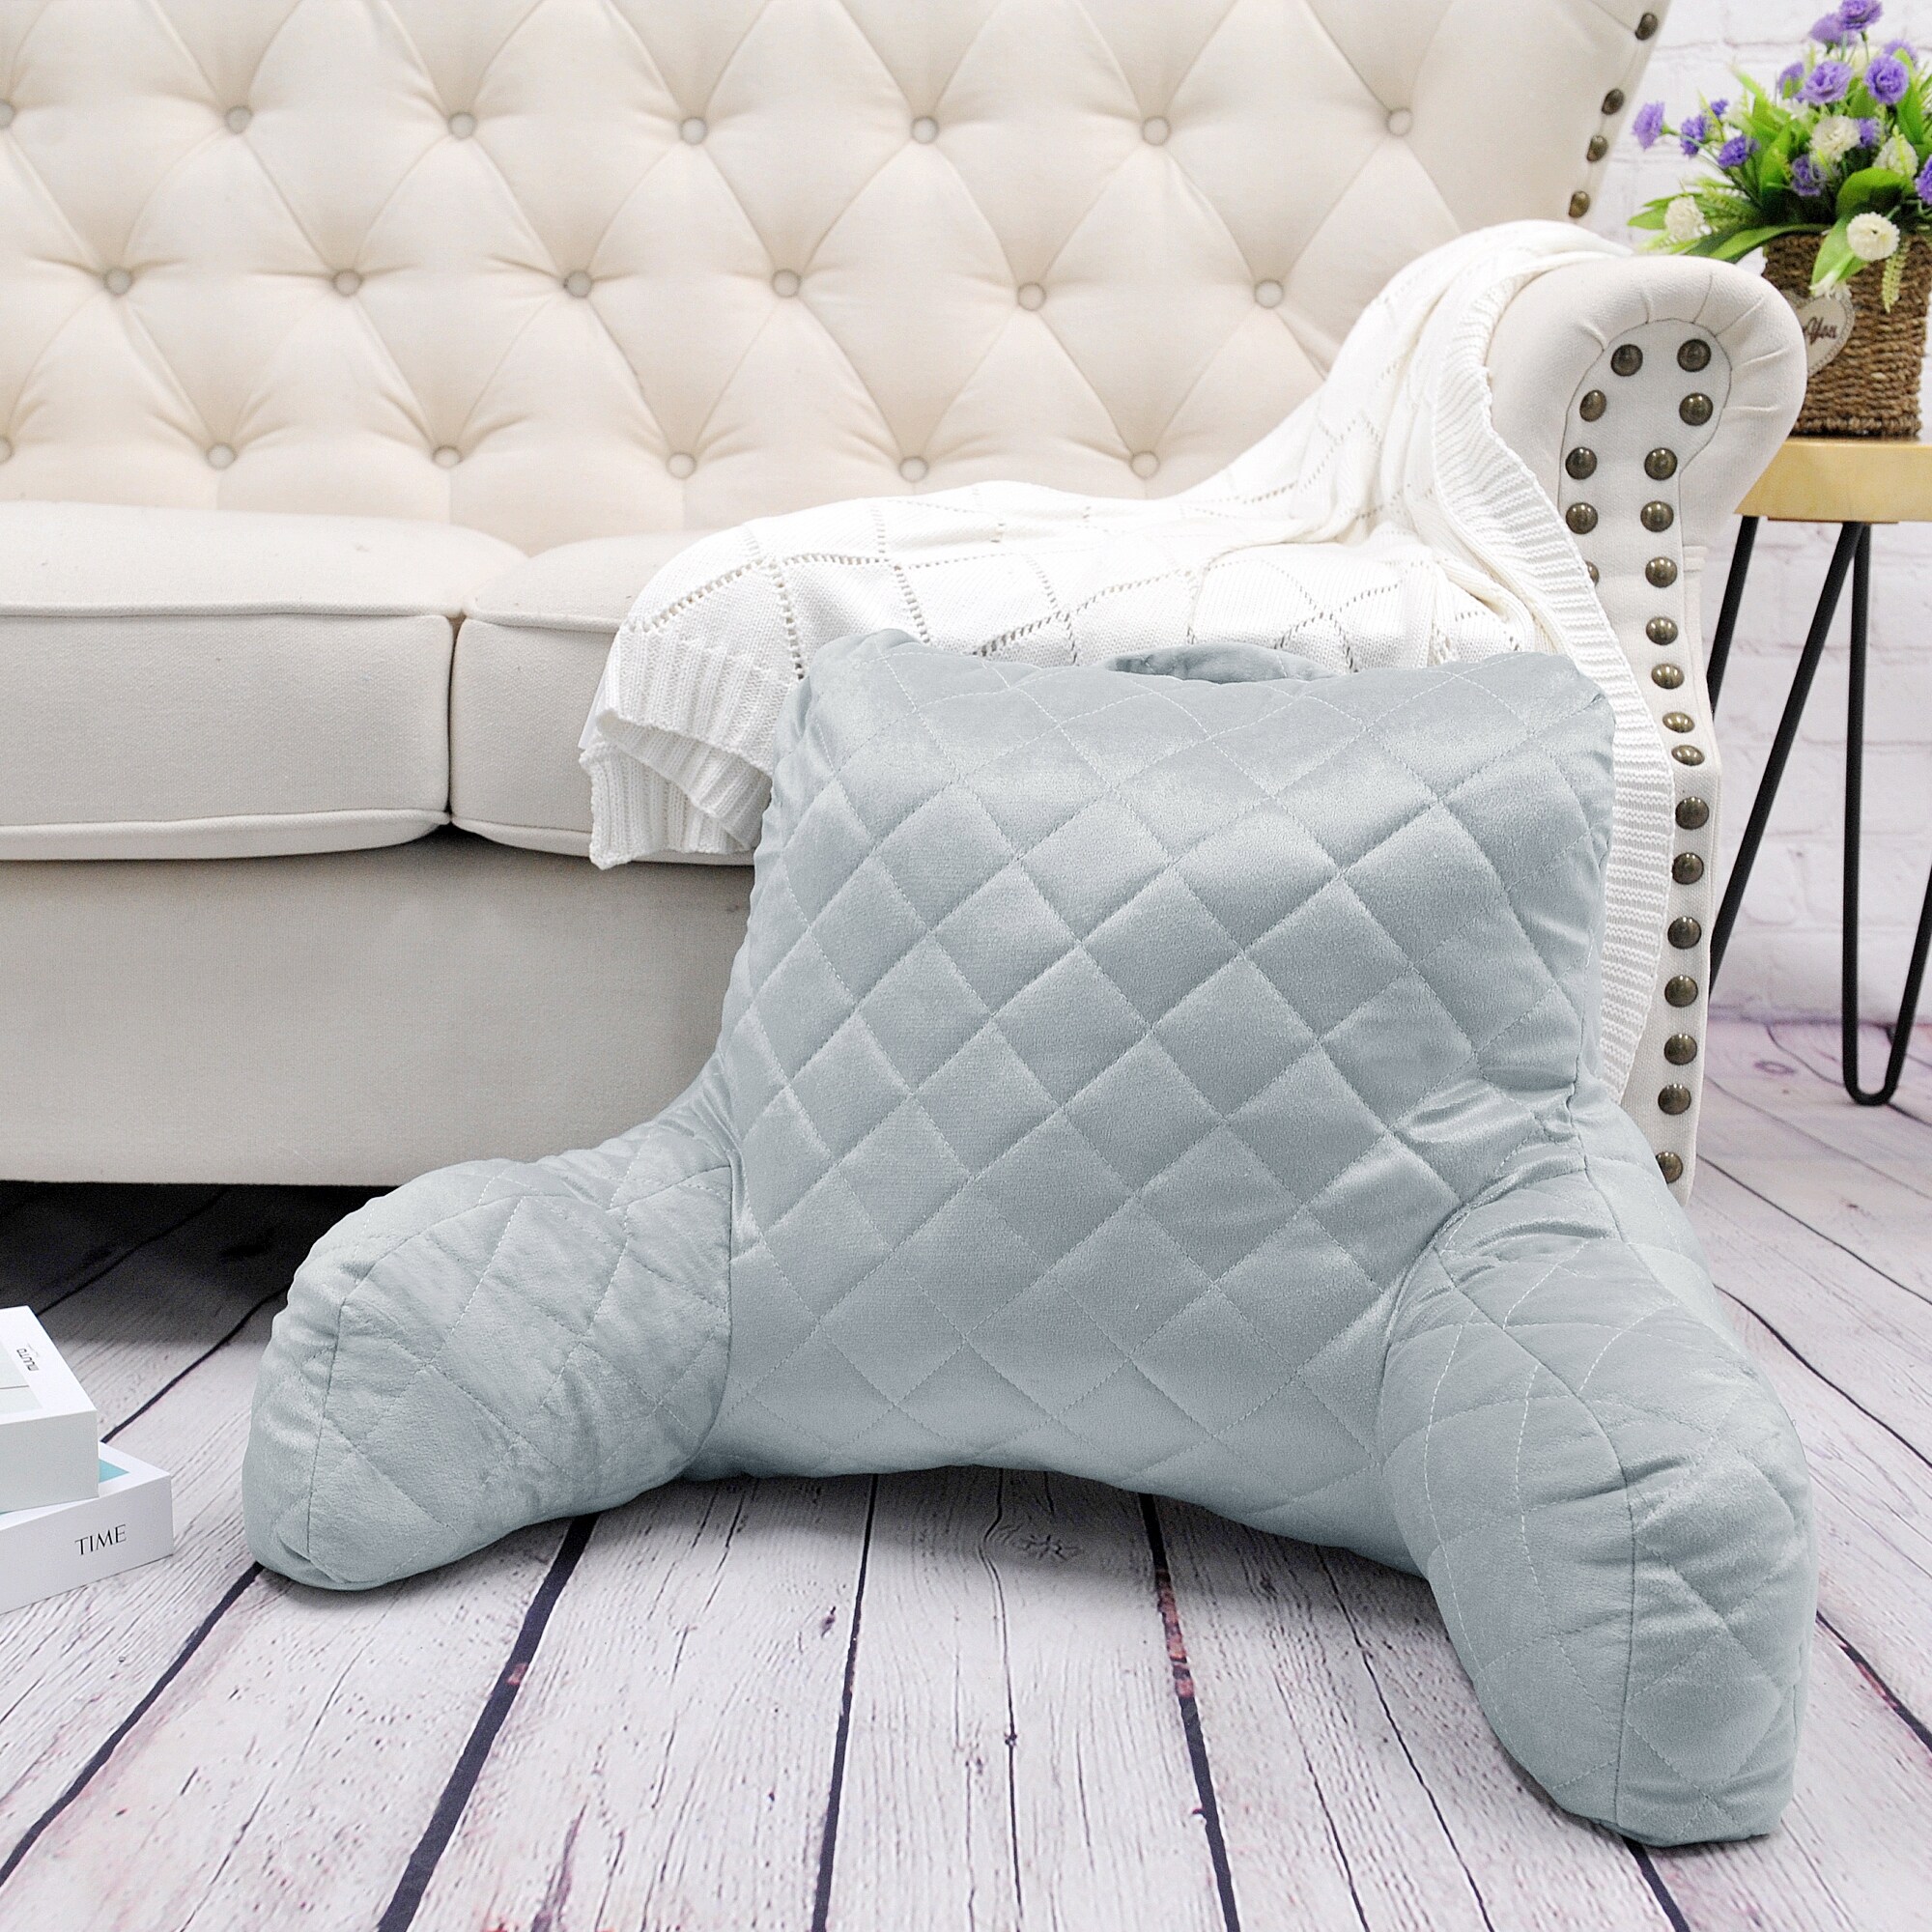 https://ak1.ostkcdn.com/images/products/is/images/direct/c407d1212e4e5f1f15fe205d84b9aee8fab79bea/Velvet-Do-It-Yourself-Bedrest-Reading-Pillow-Cover-and-Filling.jpg